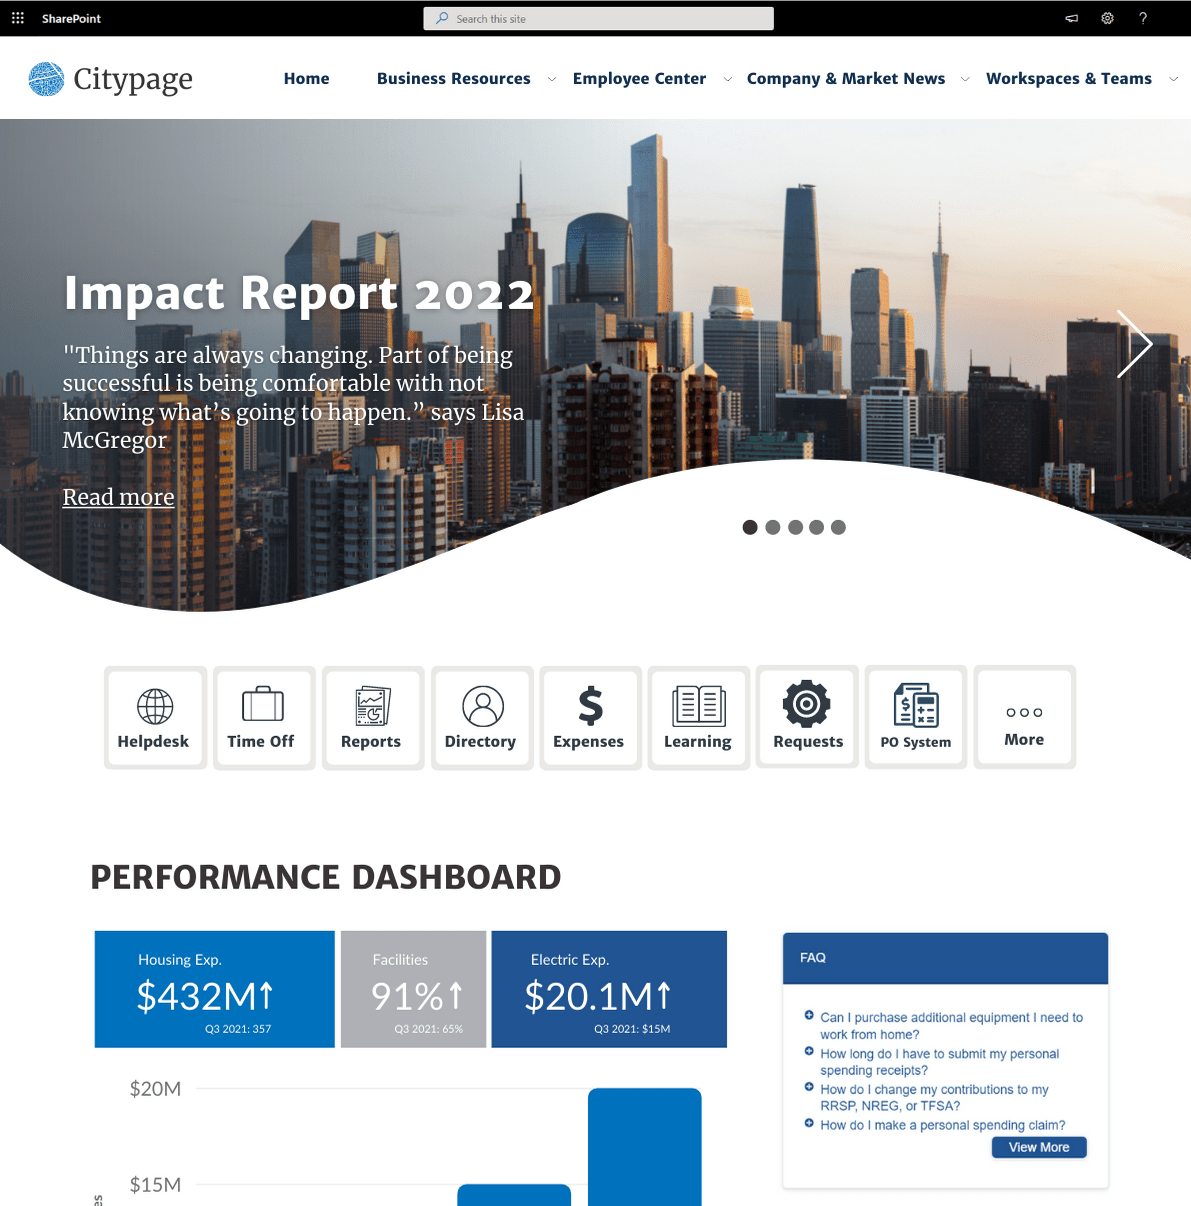 15 Modern SharePoint Intranet Site Examples for 2023 — Origami